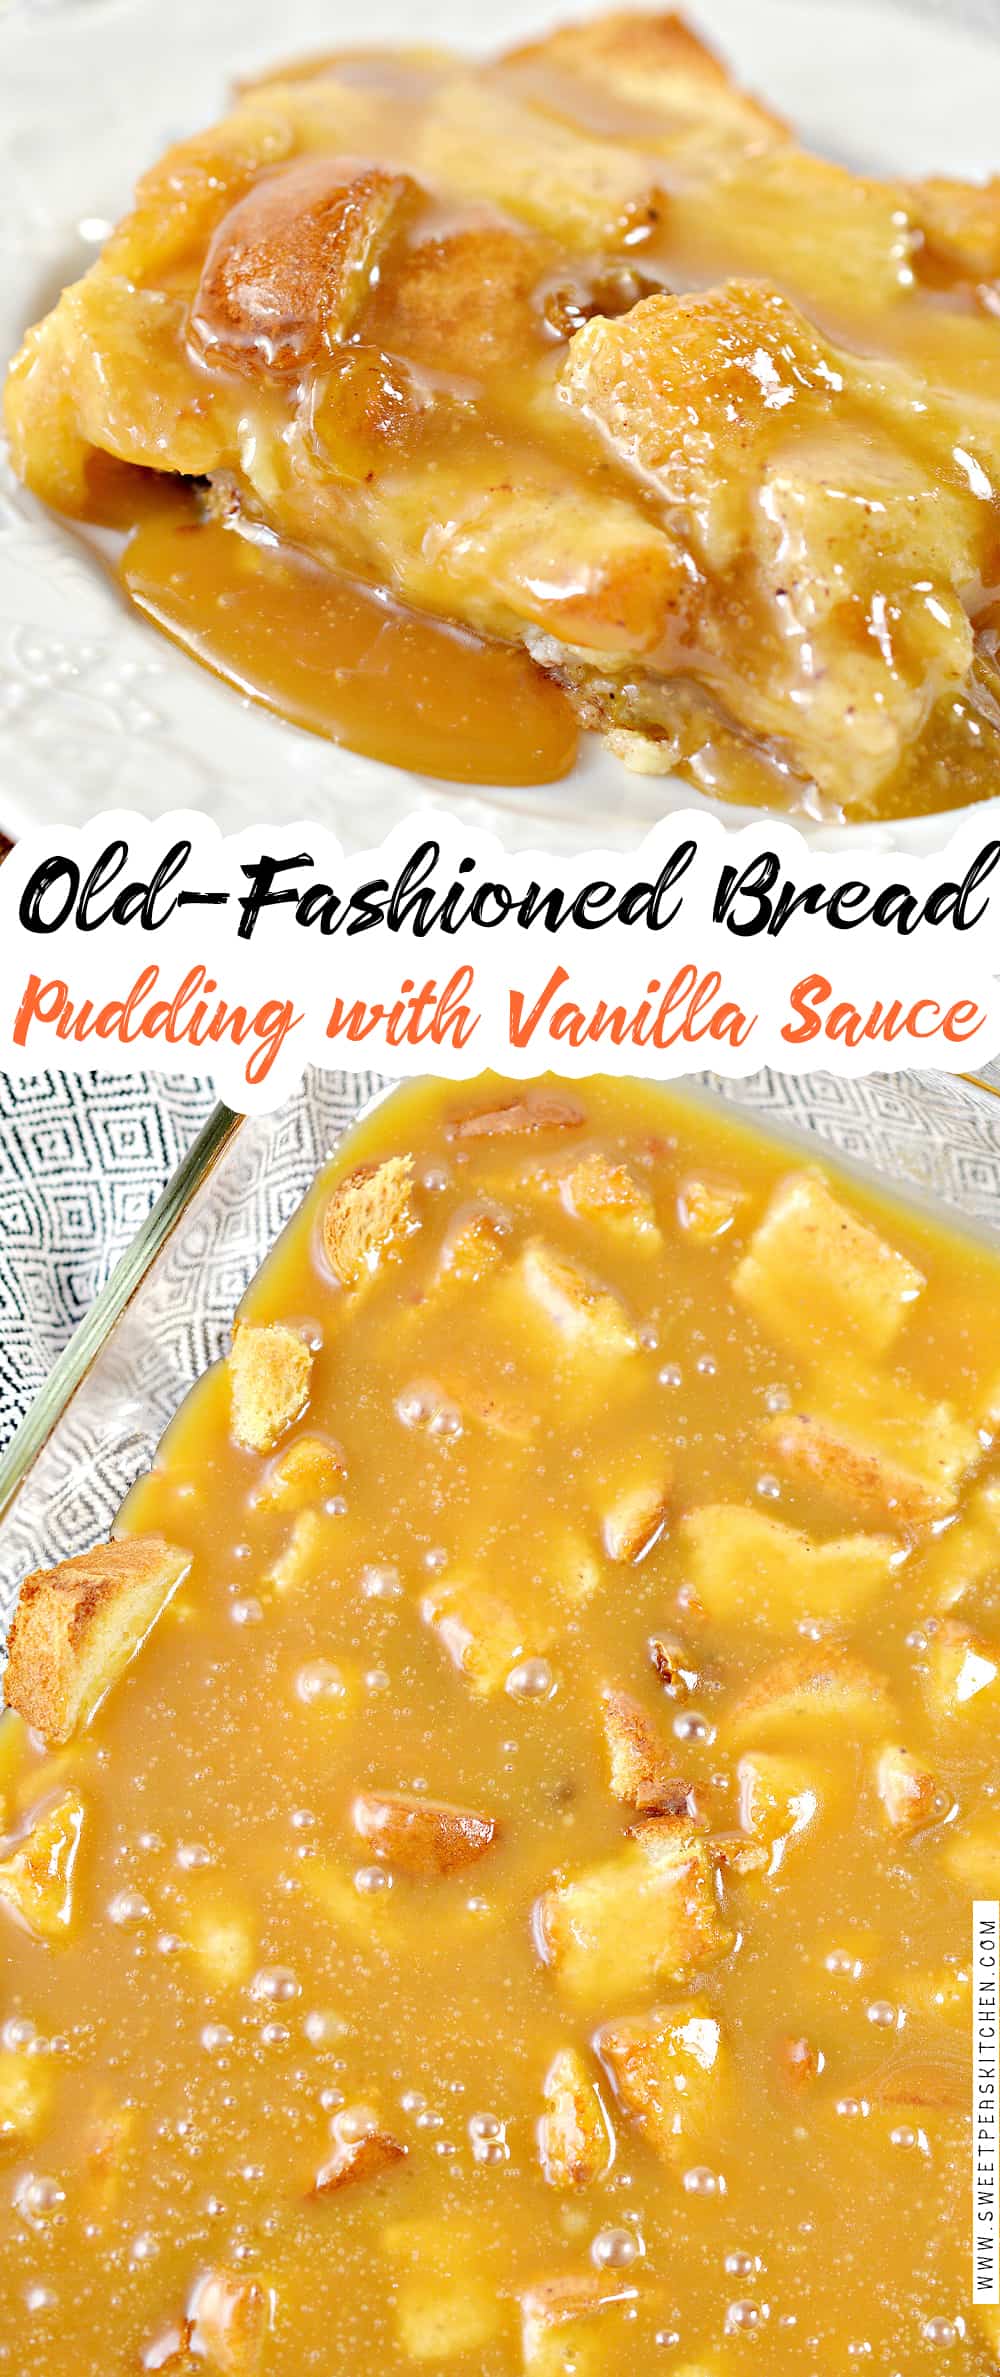 Old Fashioned Bread Pudding with Vanilla Sauce